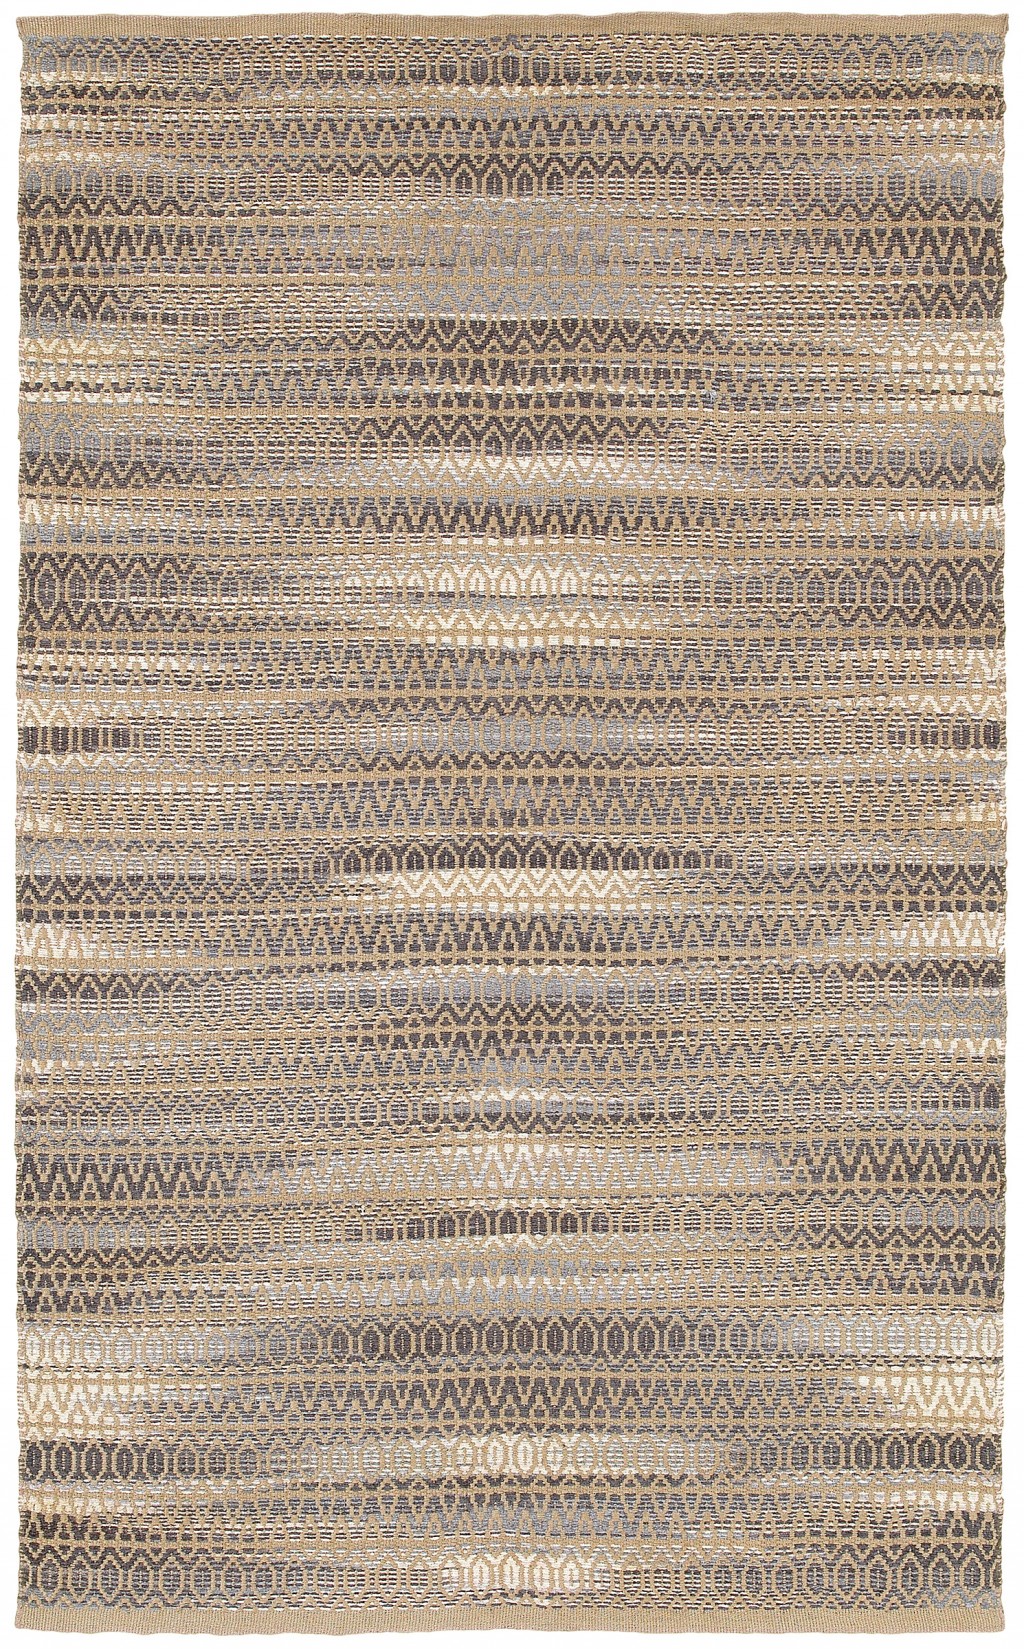 8’ x 10’ Gray and Tan Striated Runner Rug-395134-1